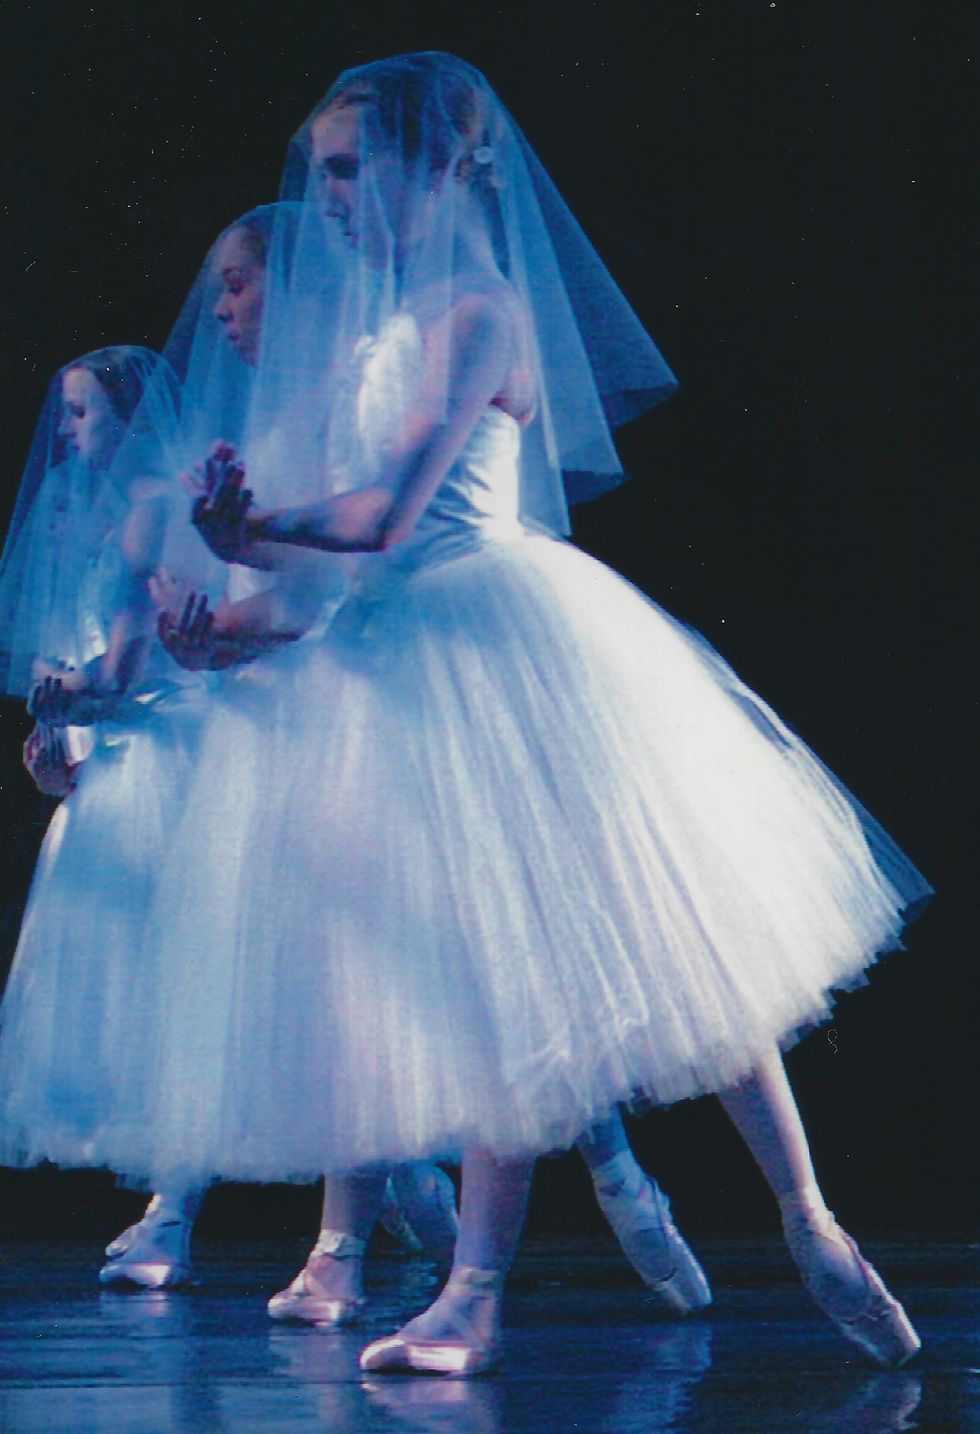 A young ballerina, wearing a white romantic tutu and veil, stands in tendu derriu00e9re with her arms crossed in front of her, palms up. A row of similarly costumed women stand directly behind her in the same pose.